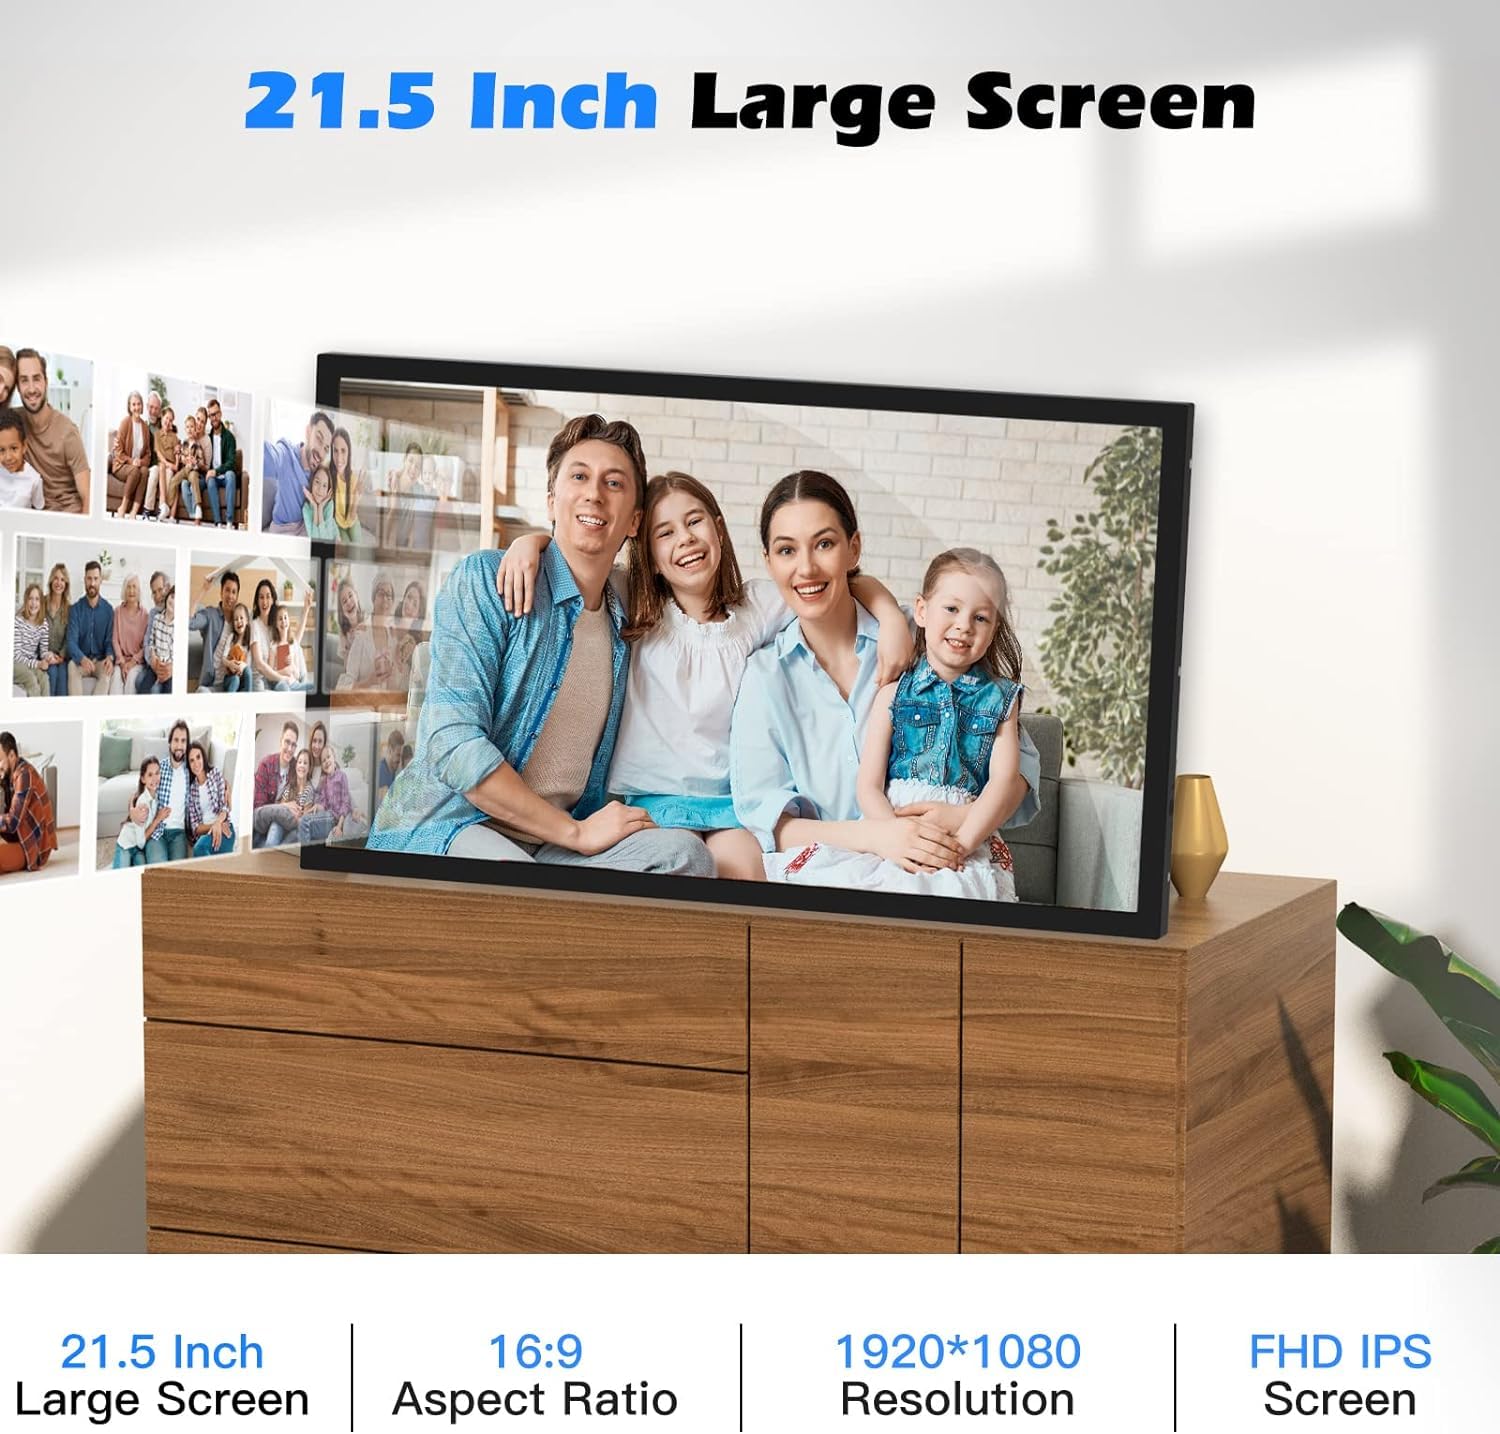 21.5-Inch Dual-WiFi Extra Large Digital Picture Frame - 32GB Digital Photo Frame FHD IPS Panel, Wall Mountable, Share Photos Videos via App Email, Sync Smartphone Screen, Suit for Home Decorations